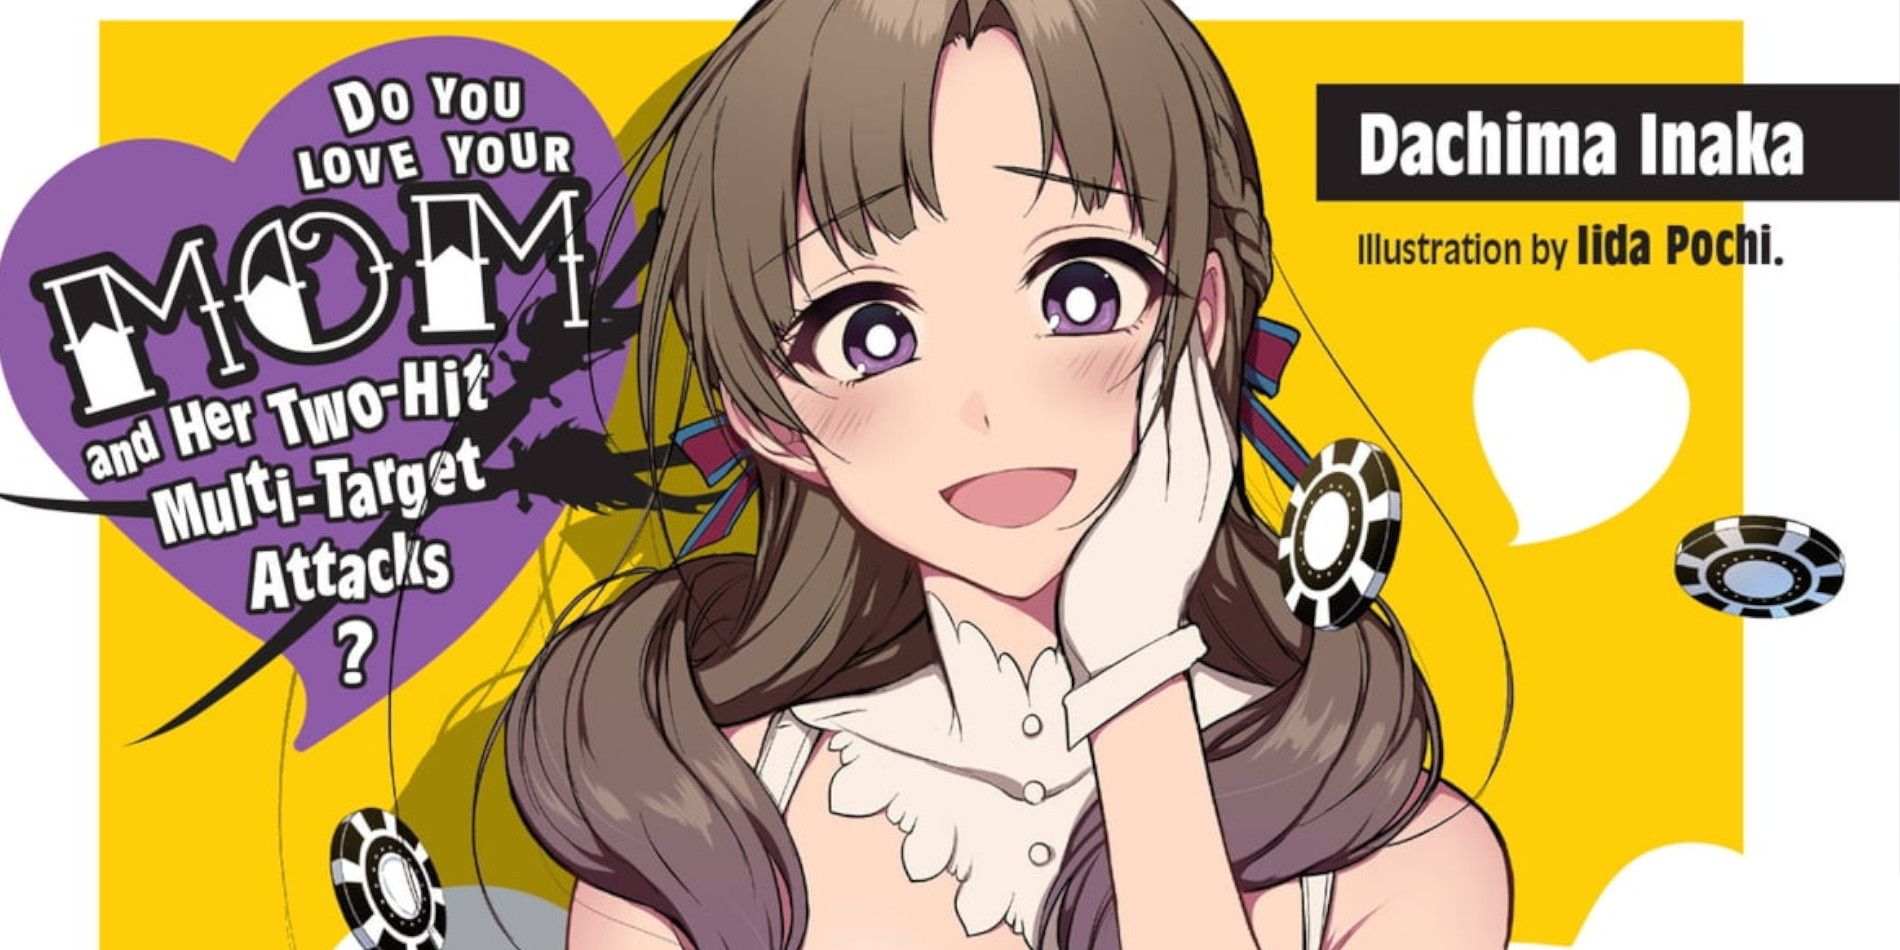 Do You Love Your Mom and Her Two-Hit Multi-Target Attacks? Light Novel Cover